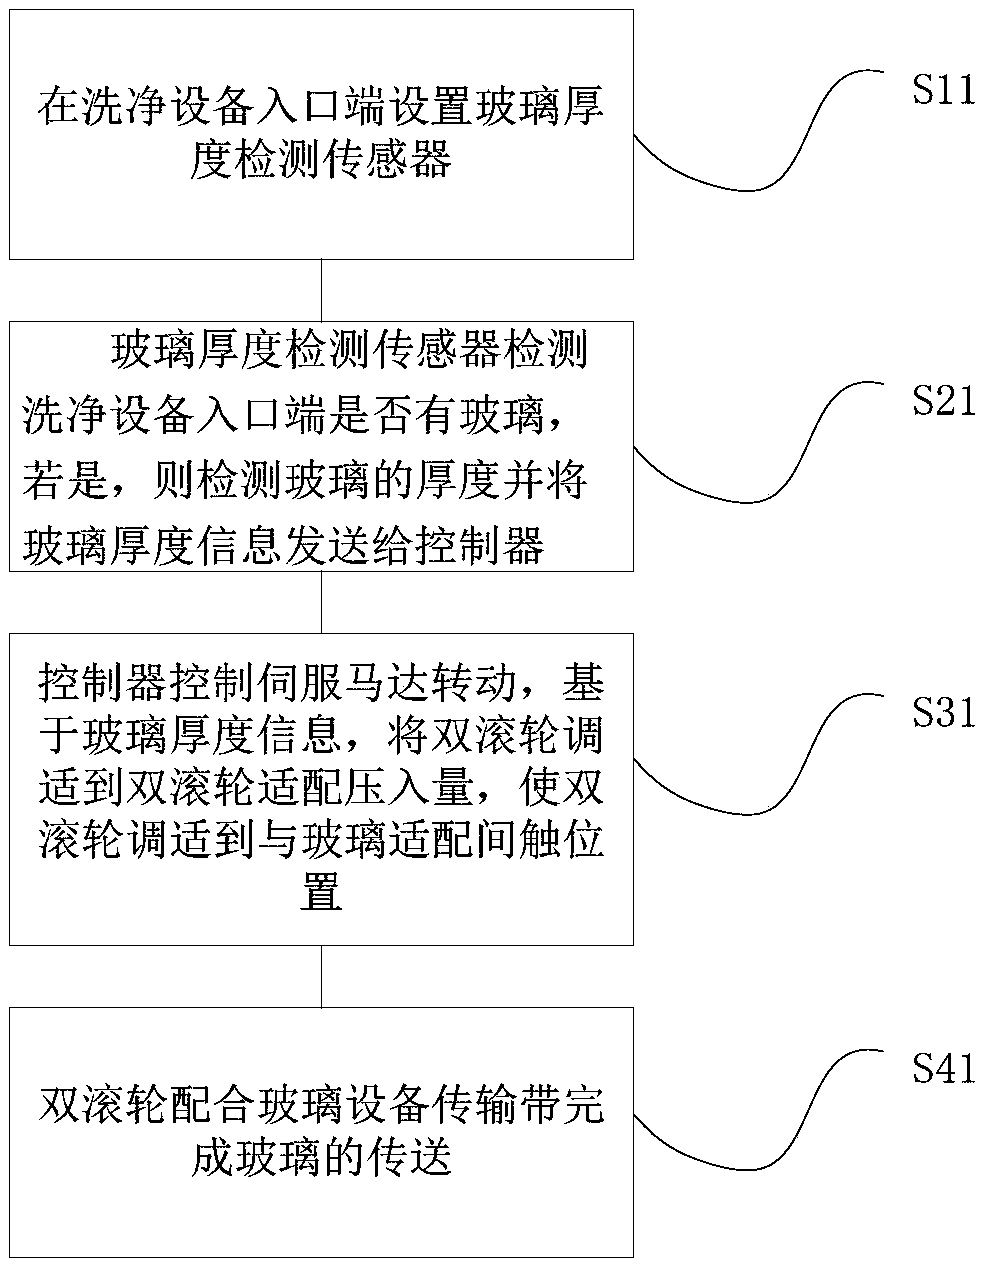 Conveying method and conveying equipment